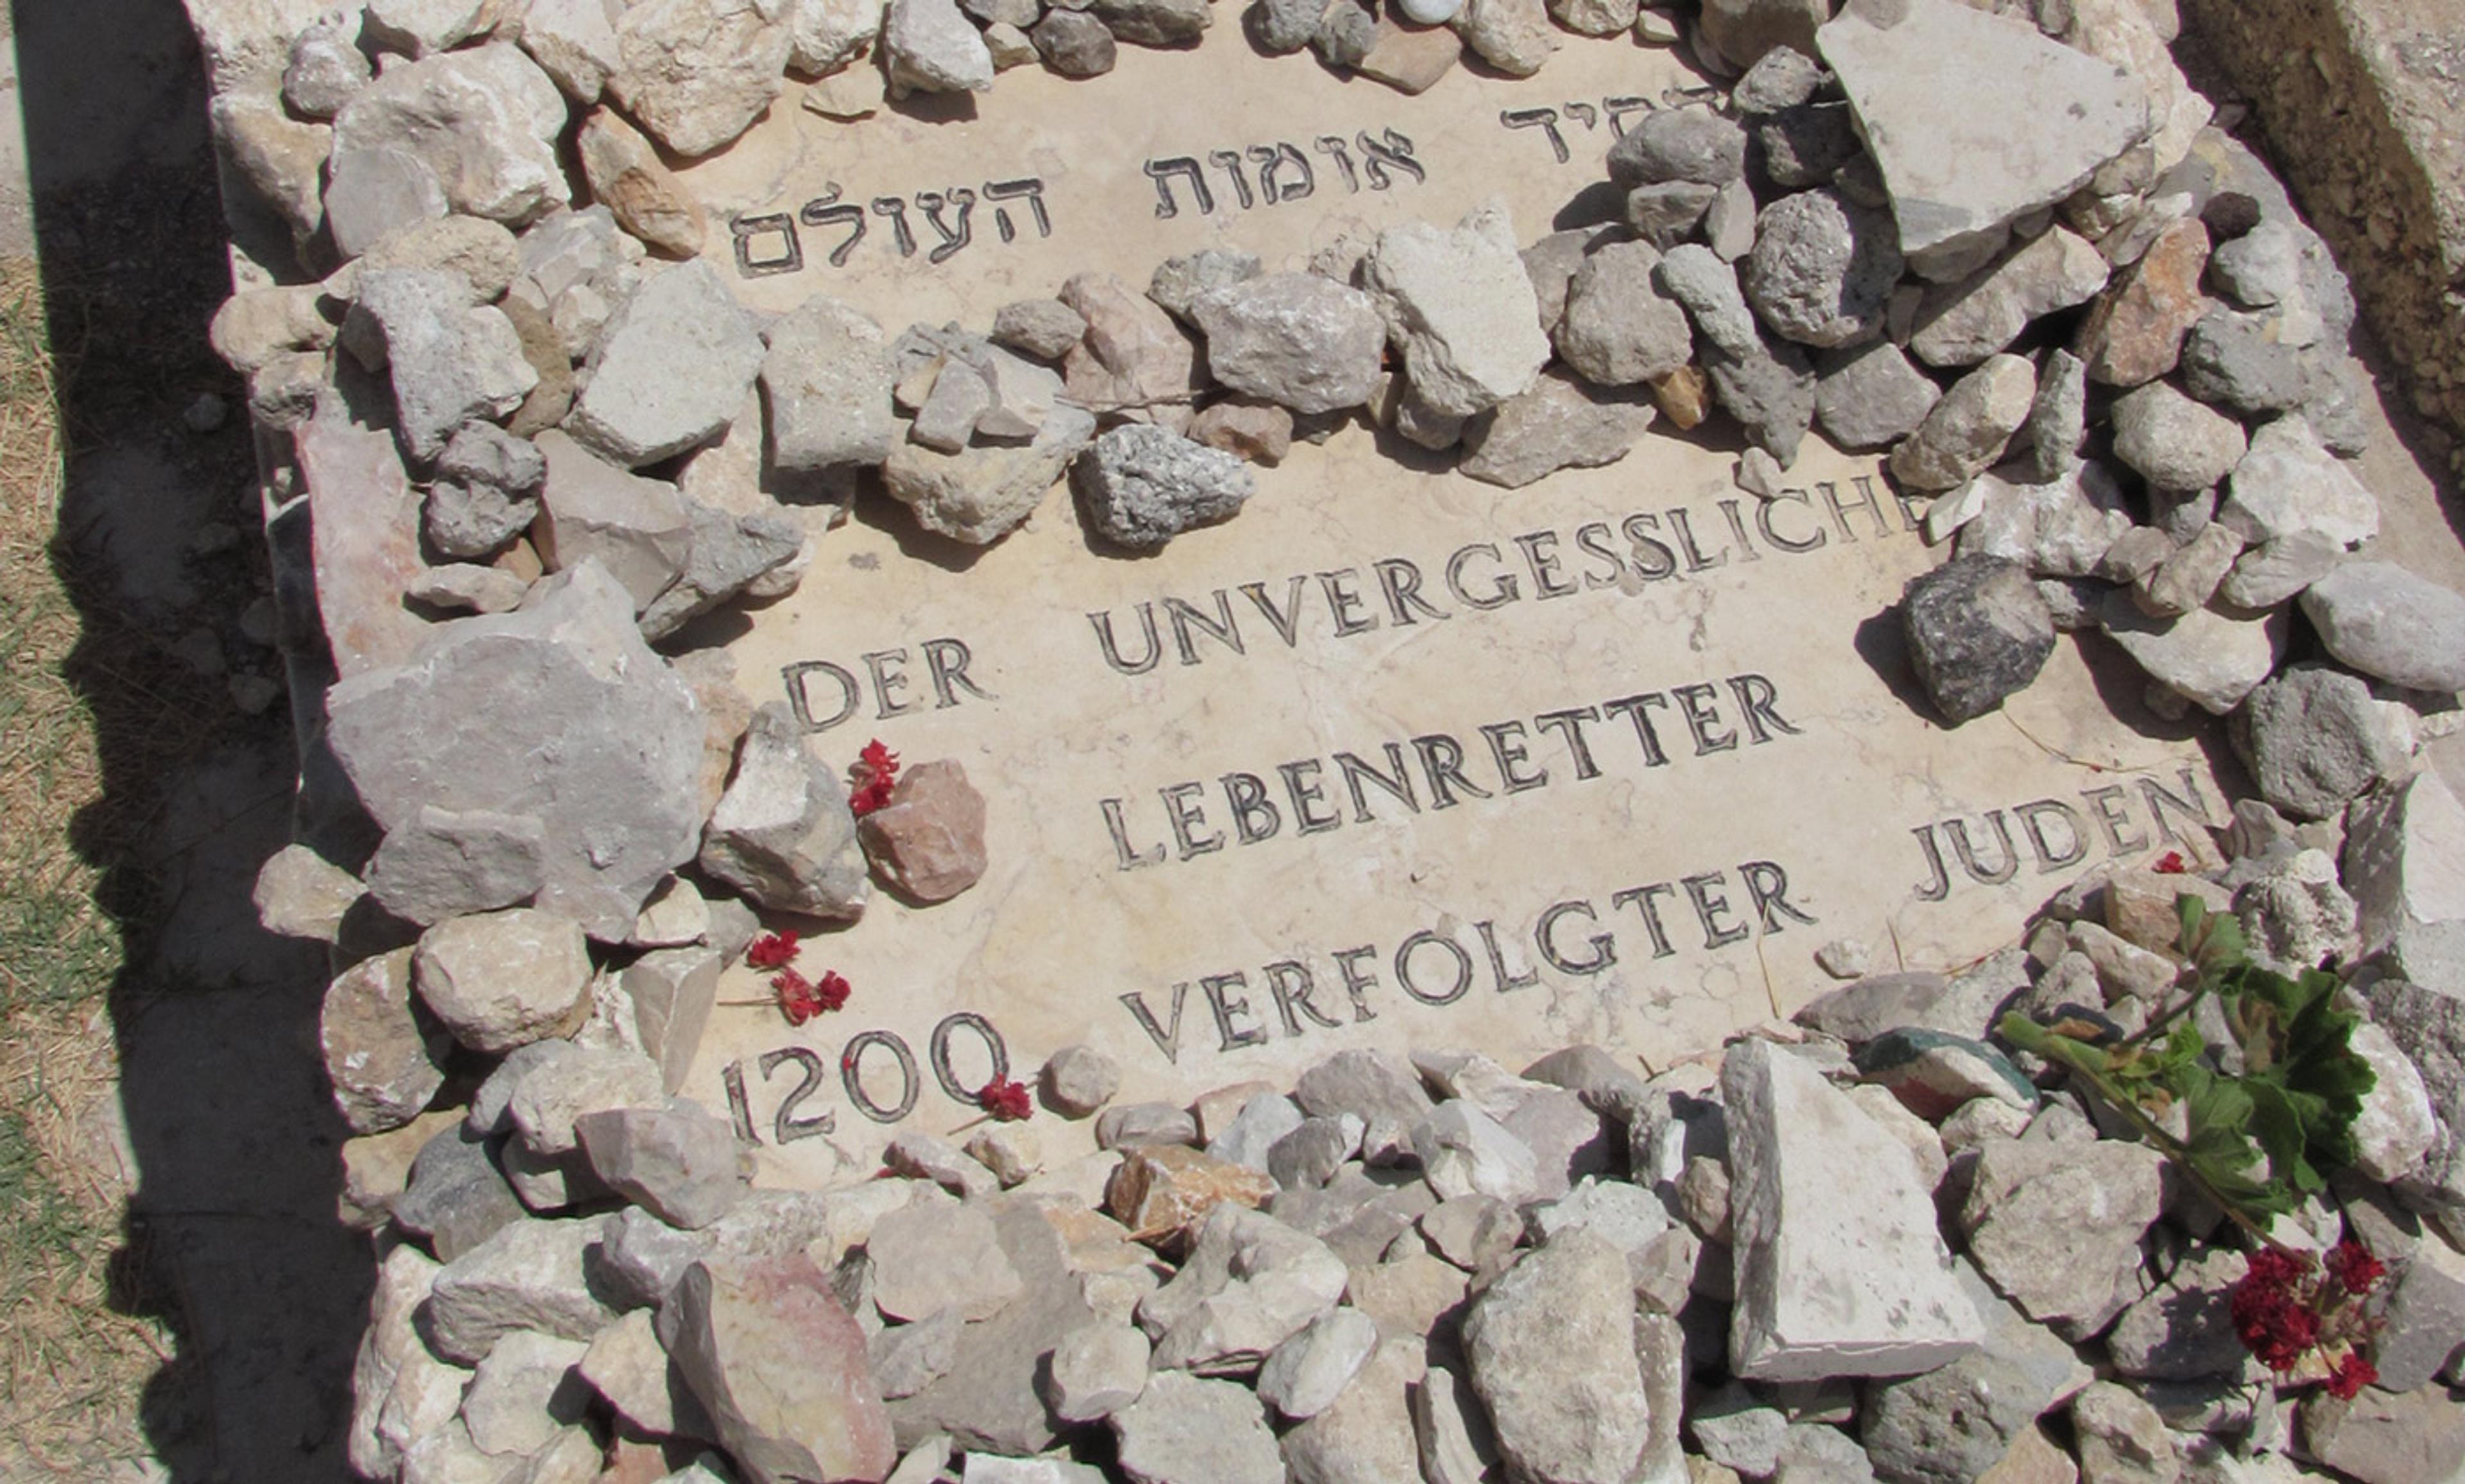 <p>The grave of Oskar Schindler. The German phrase reads ‘The Unforgettable Lifesaver of 1200 Persecuted Jews’. <em>Photo Wikipedia</em></p>